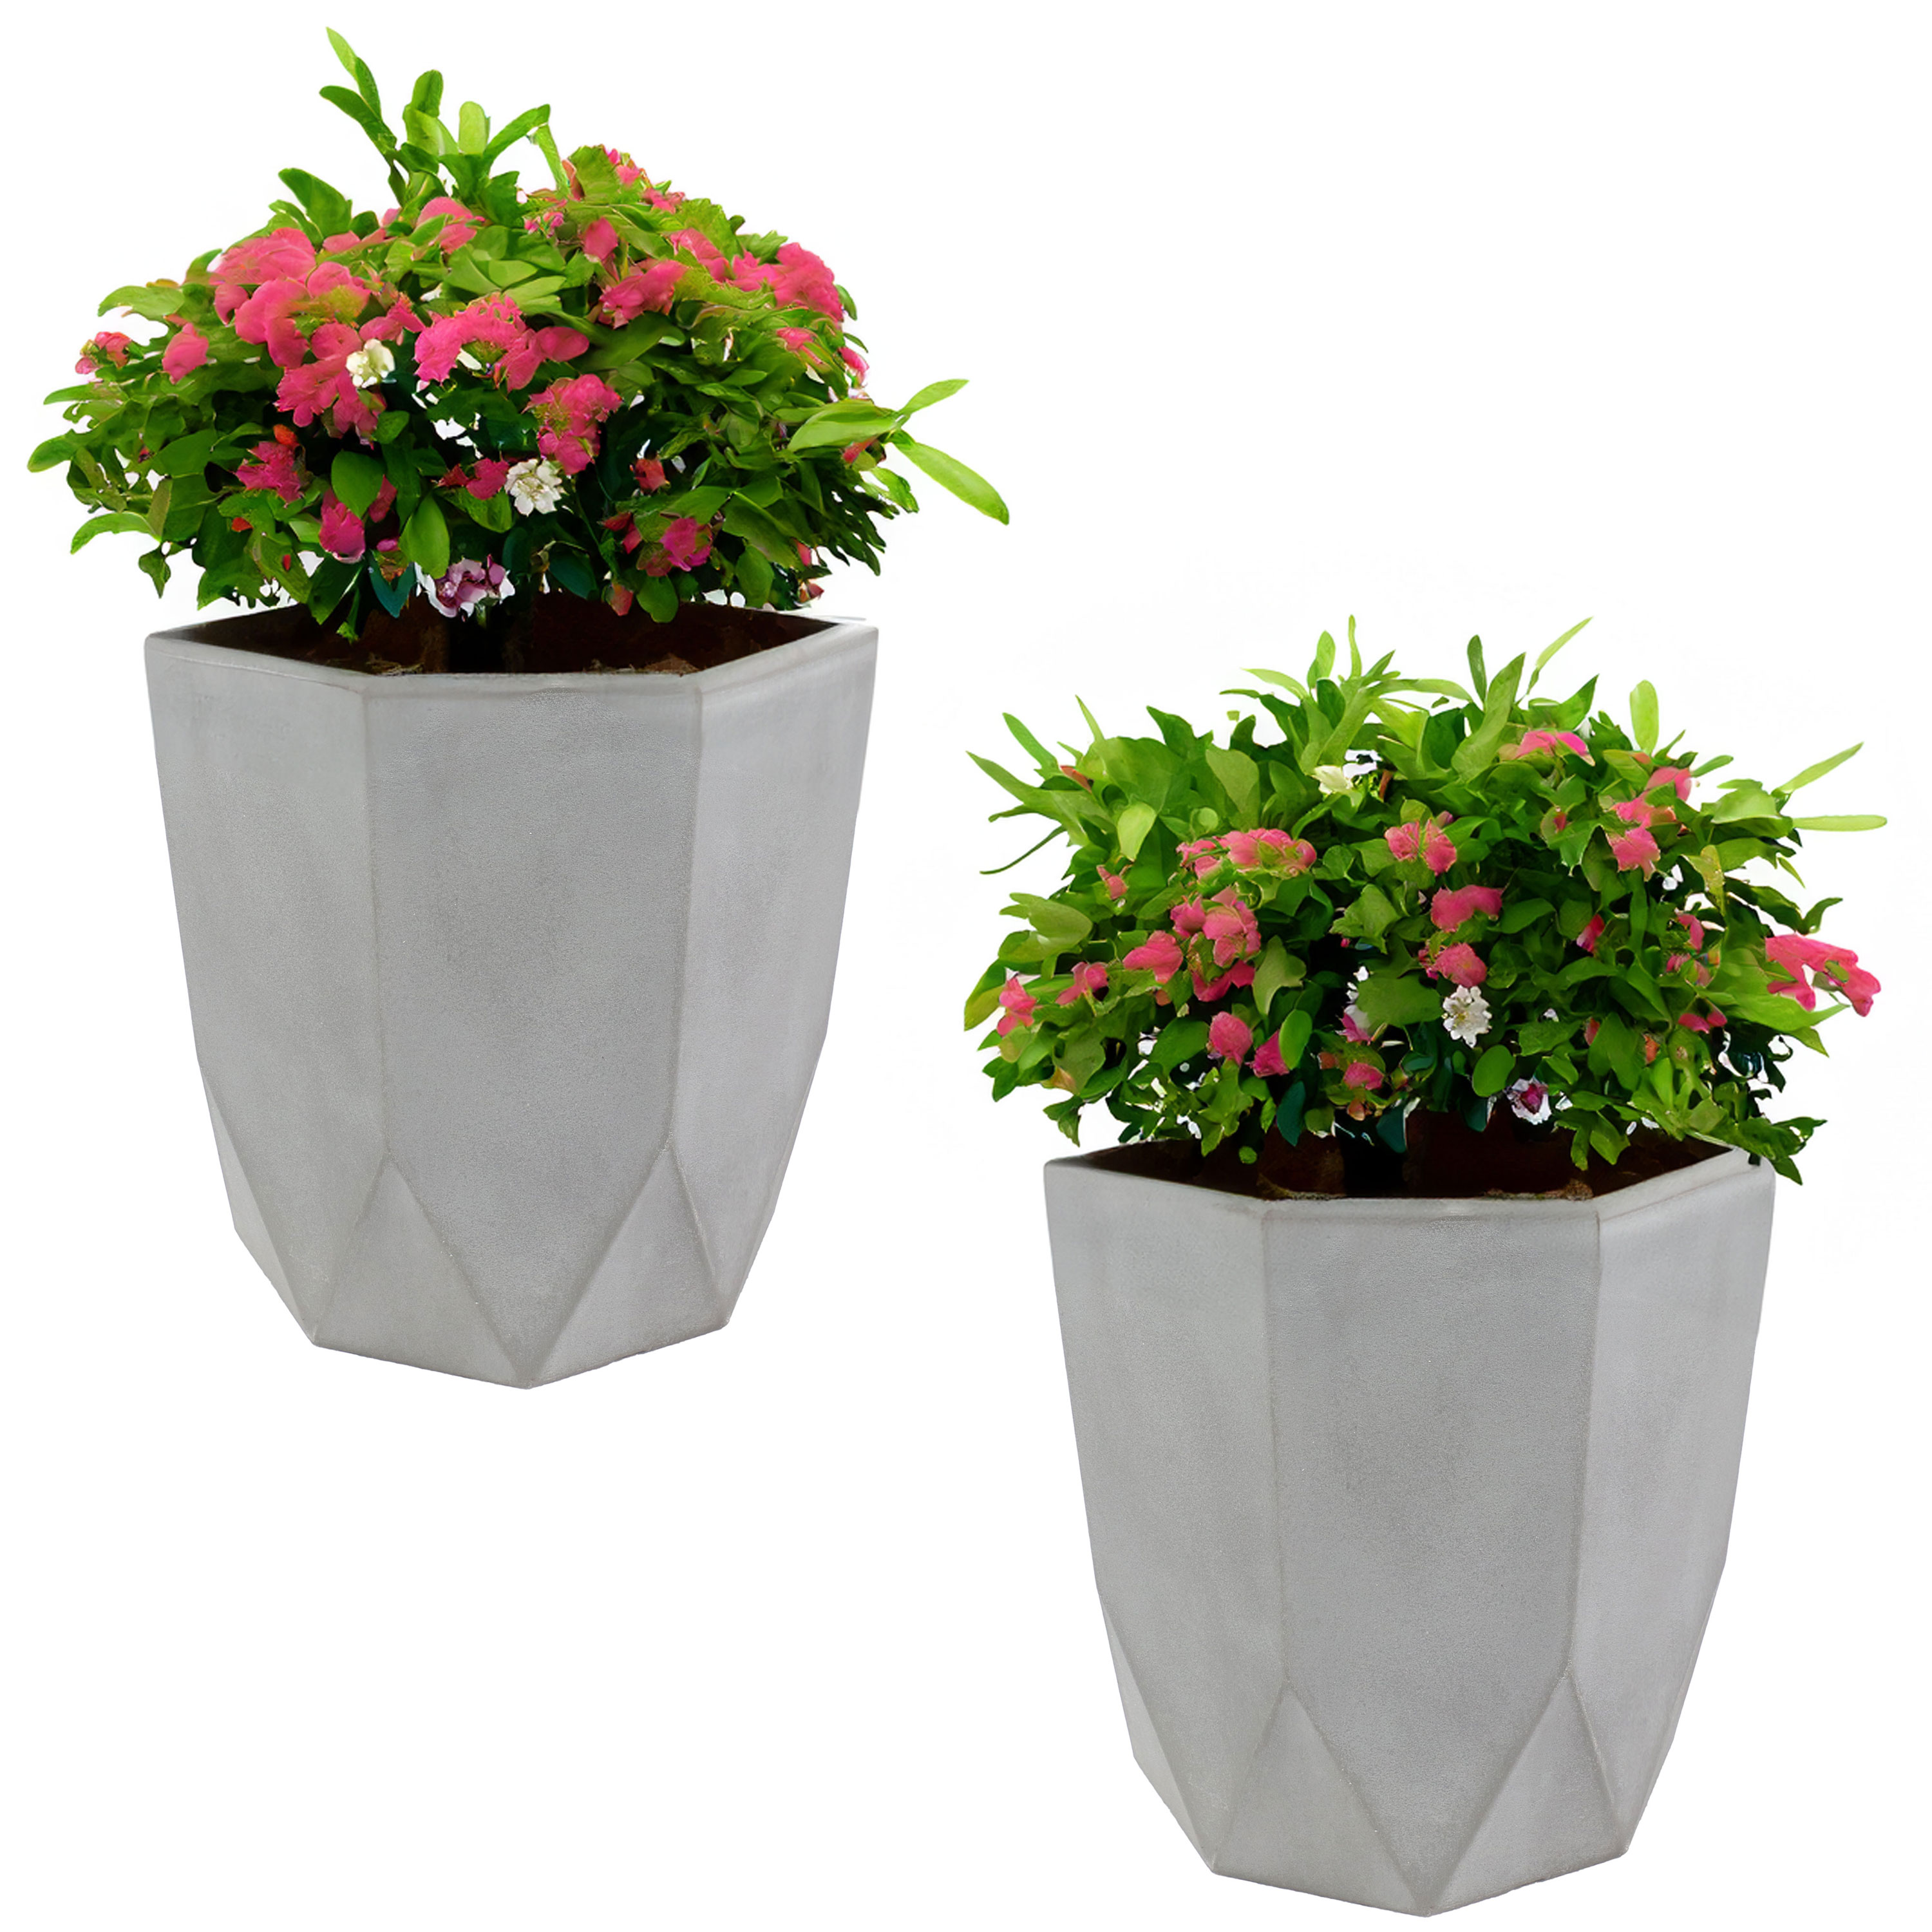 14.75 in Modern Faceted Outdoor Planter - Gray - Set of 2